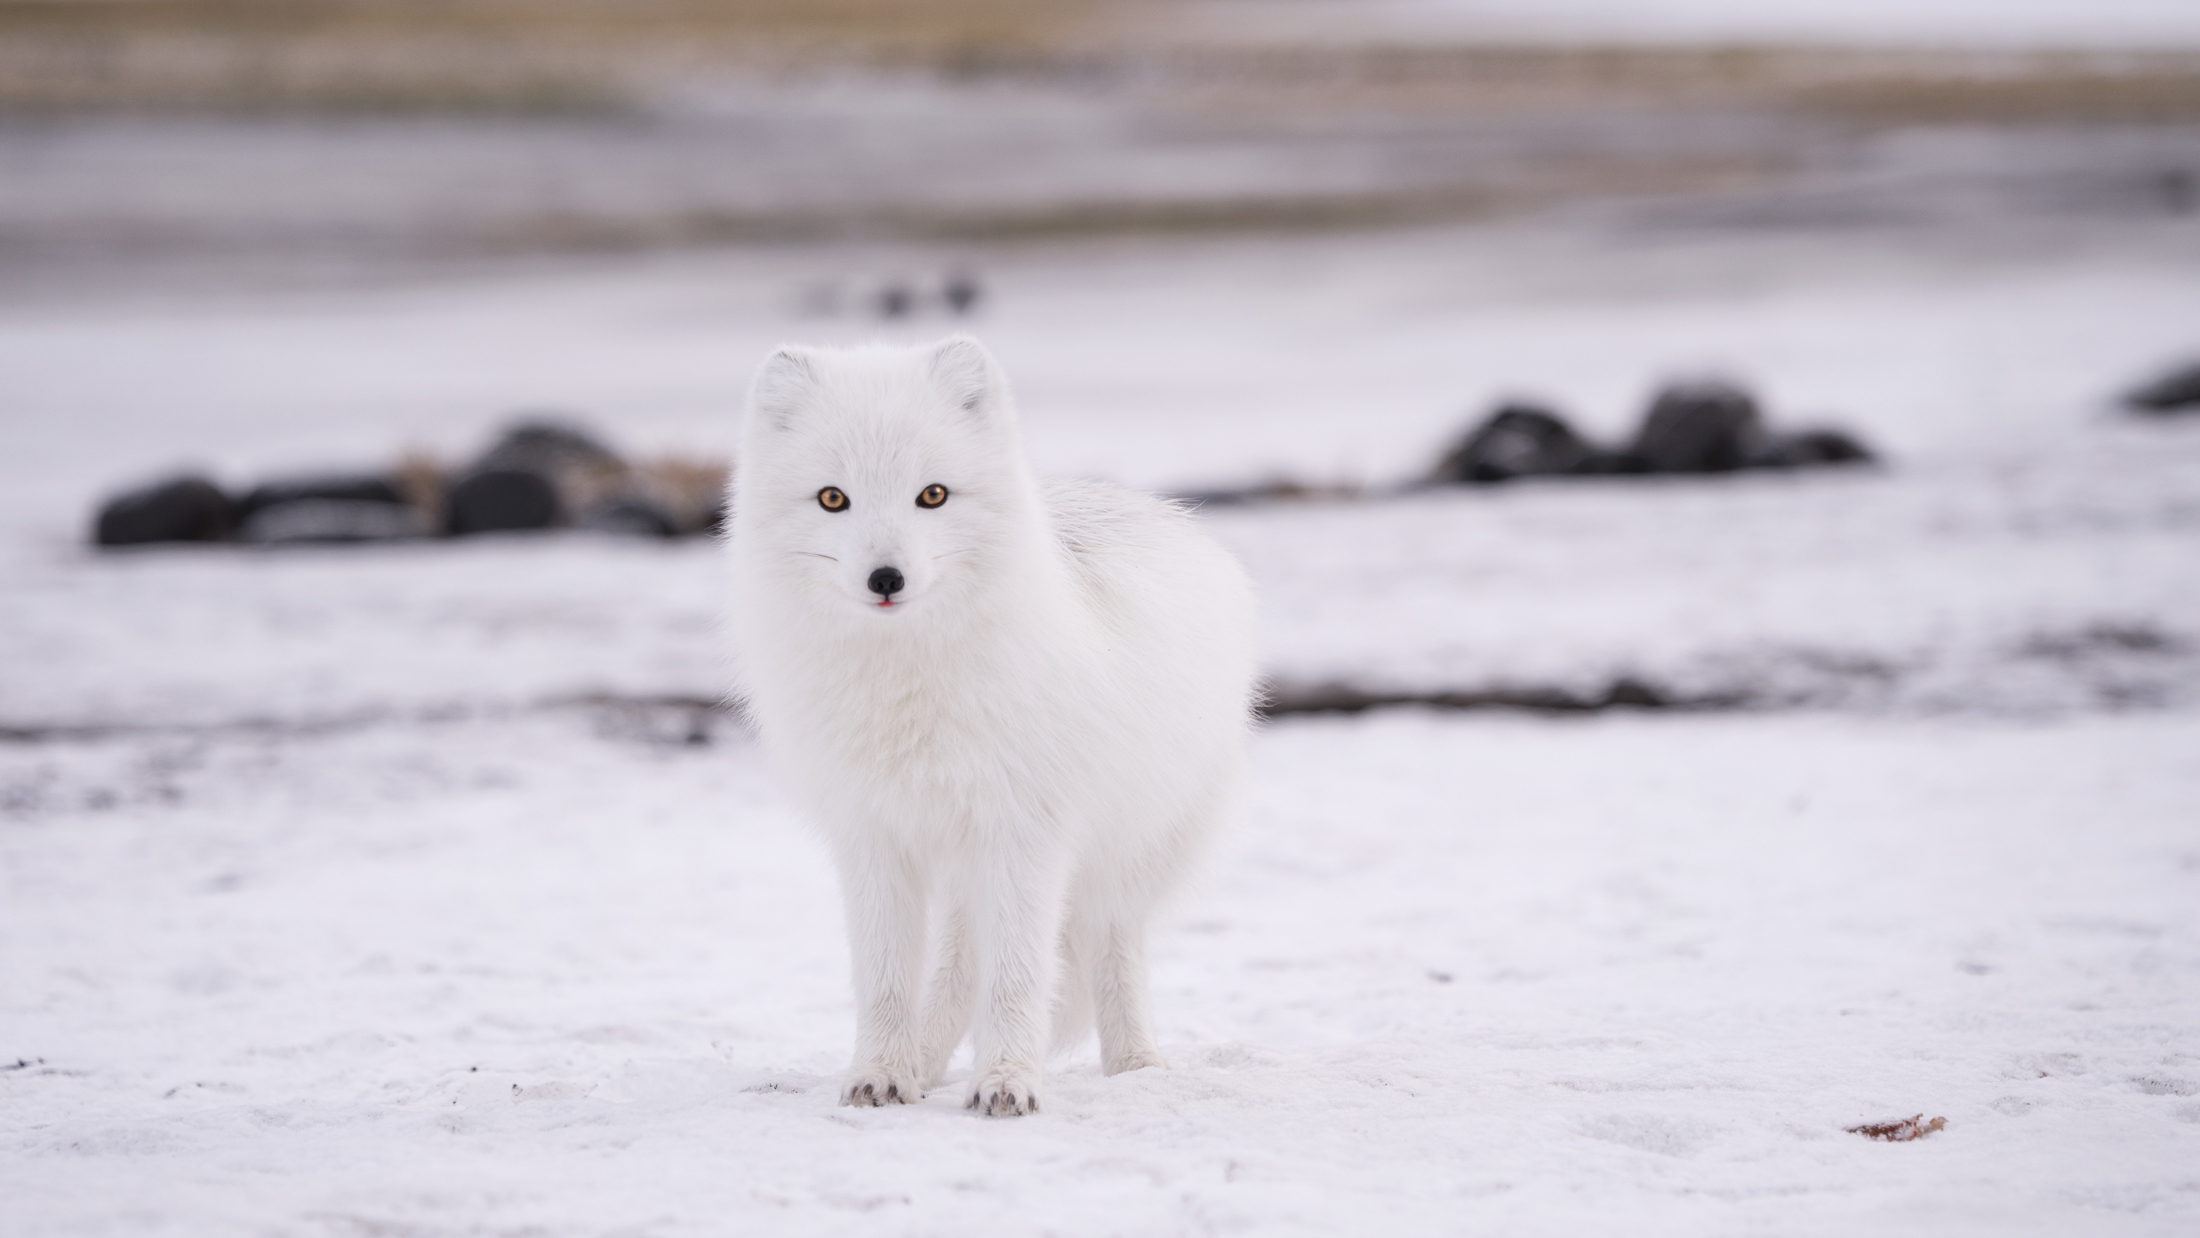 Adapt or die: Arctic animals cope with climate change